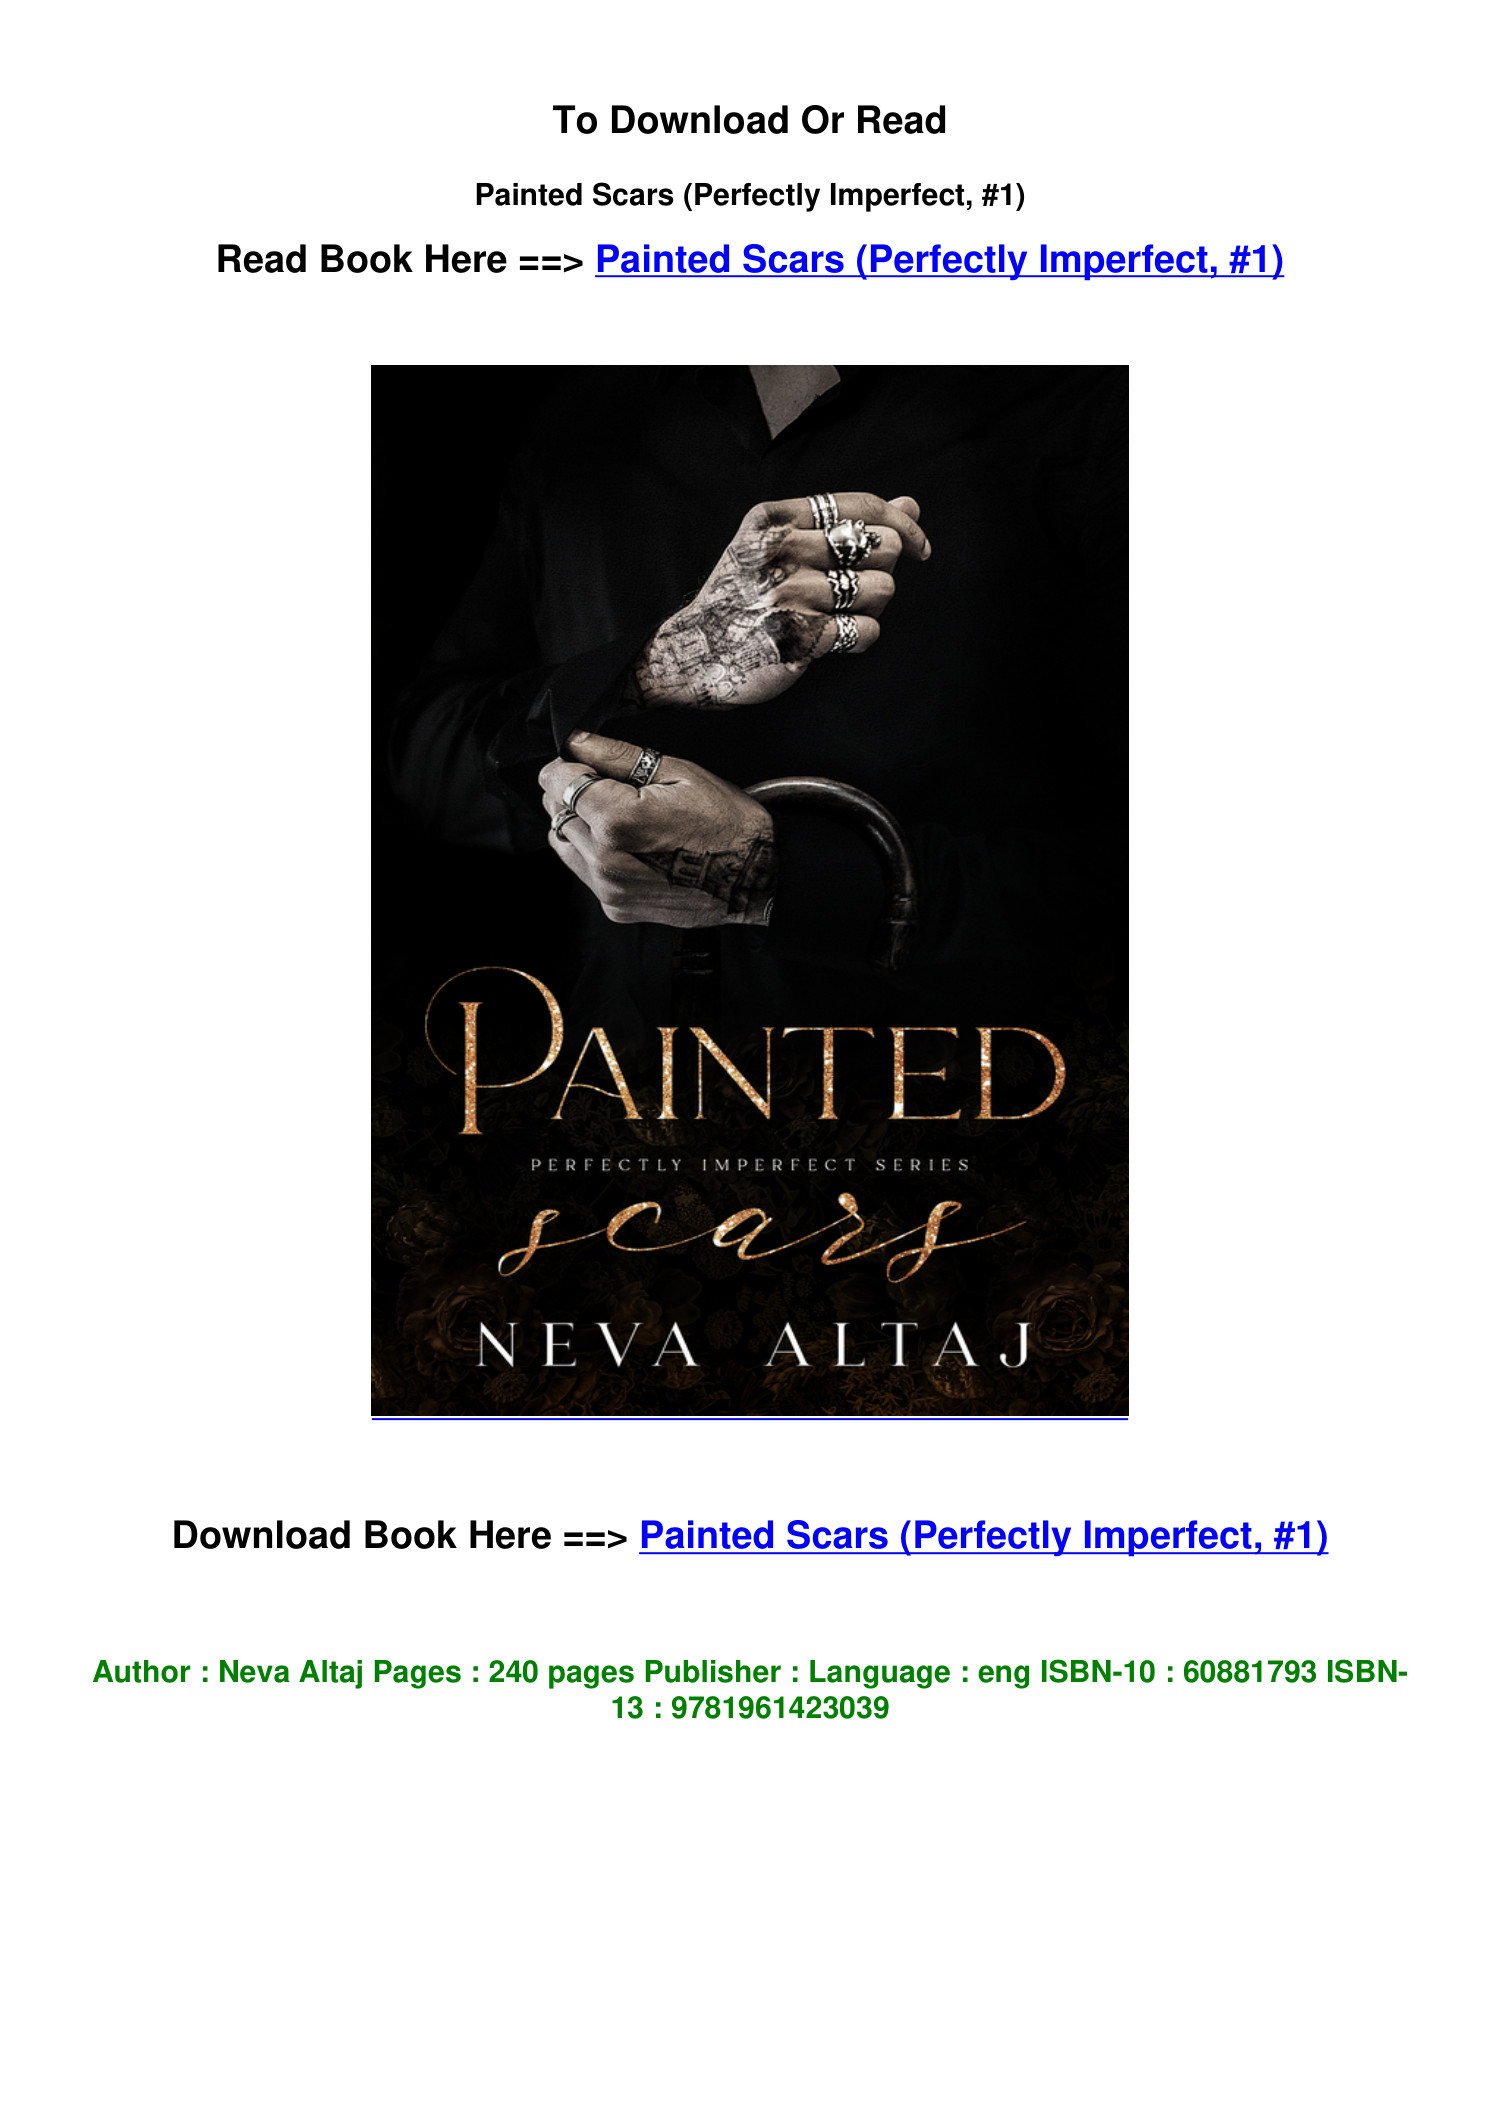 Download PDF Painted Scars Perfectly Imperfect 1 BY Neva Altaj.pdf